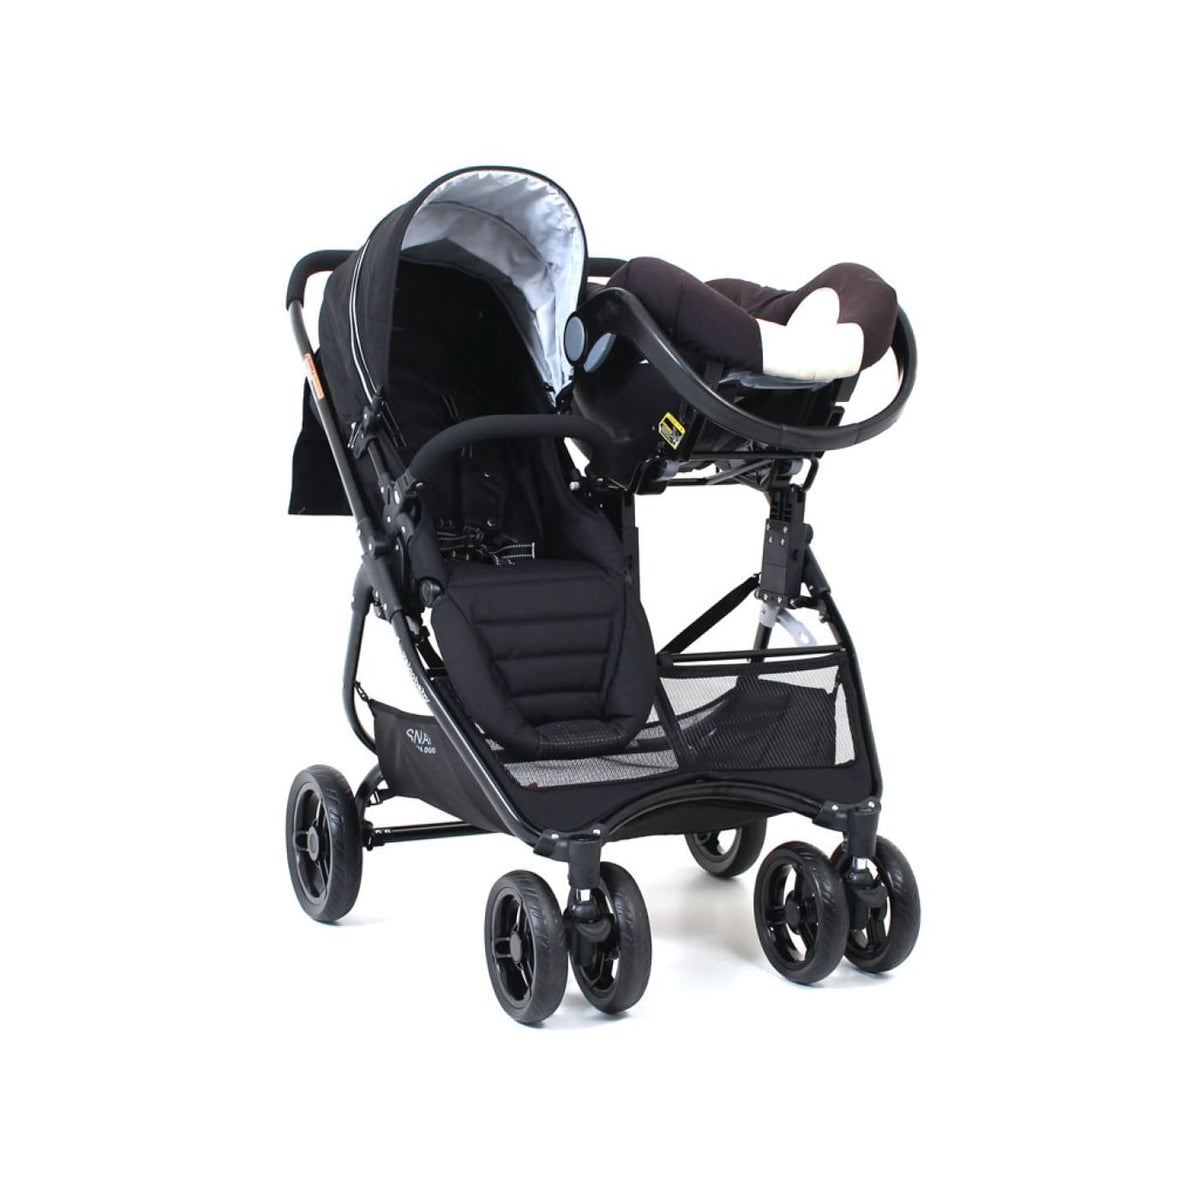 Valco Baby Adaptor B Secondary for Snap Ultra Duo (Britax/Maxi Cosi/Gemm) - PRAMS &amp; STROLLERS - ADAPTORS FOR TRAV SYS